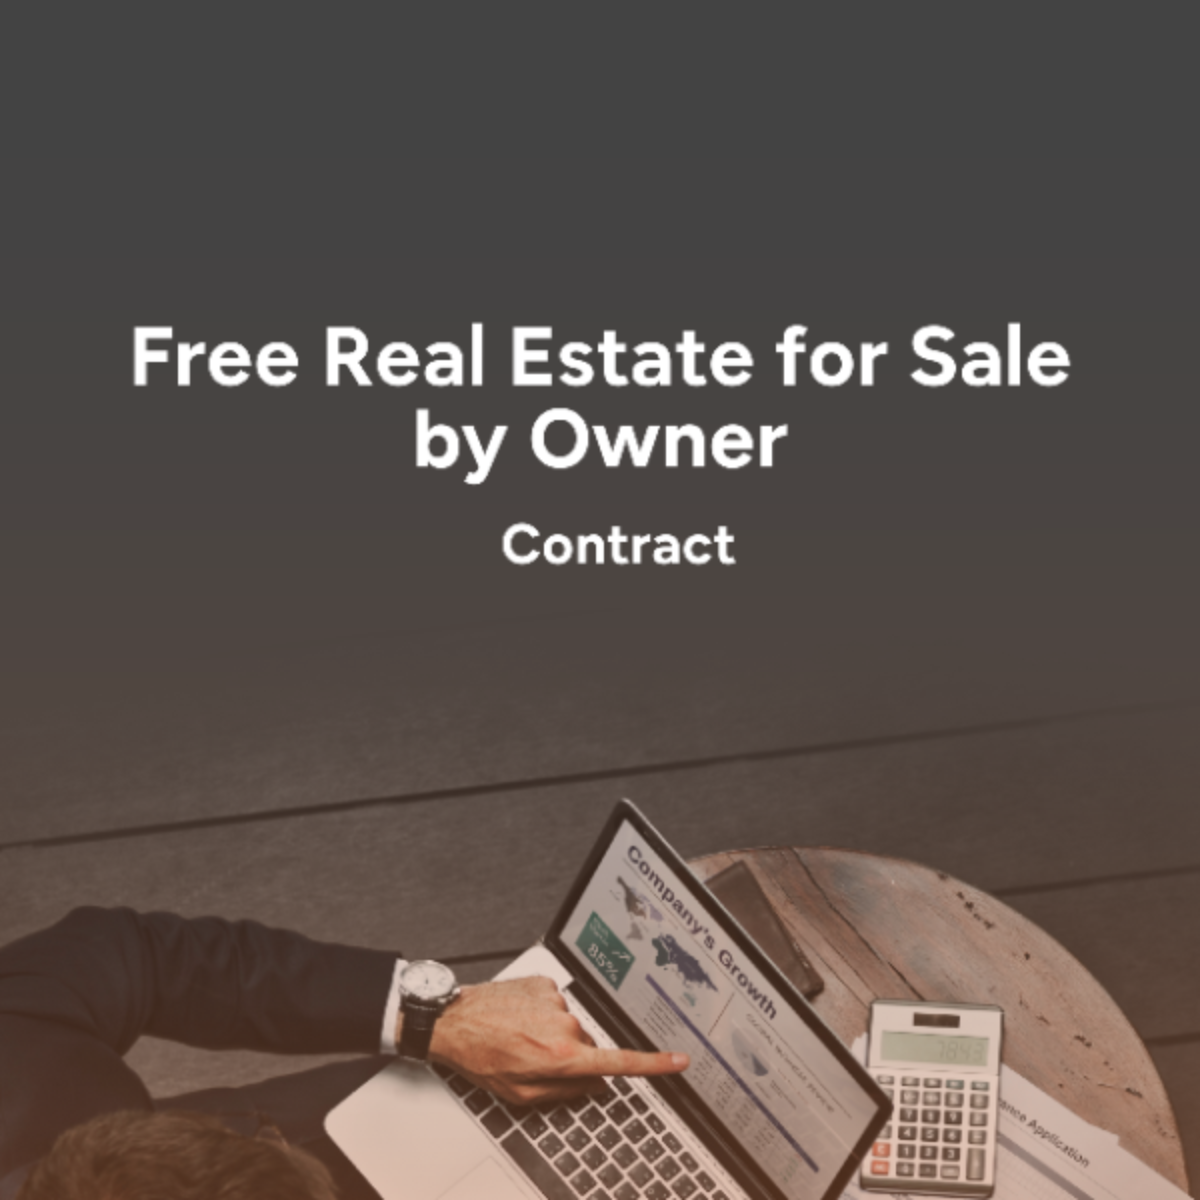 Free Real Estate for Sale by Owner Contract Template